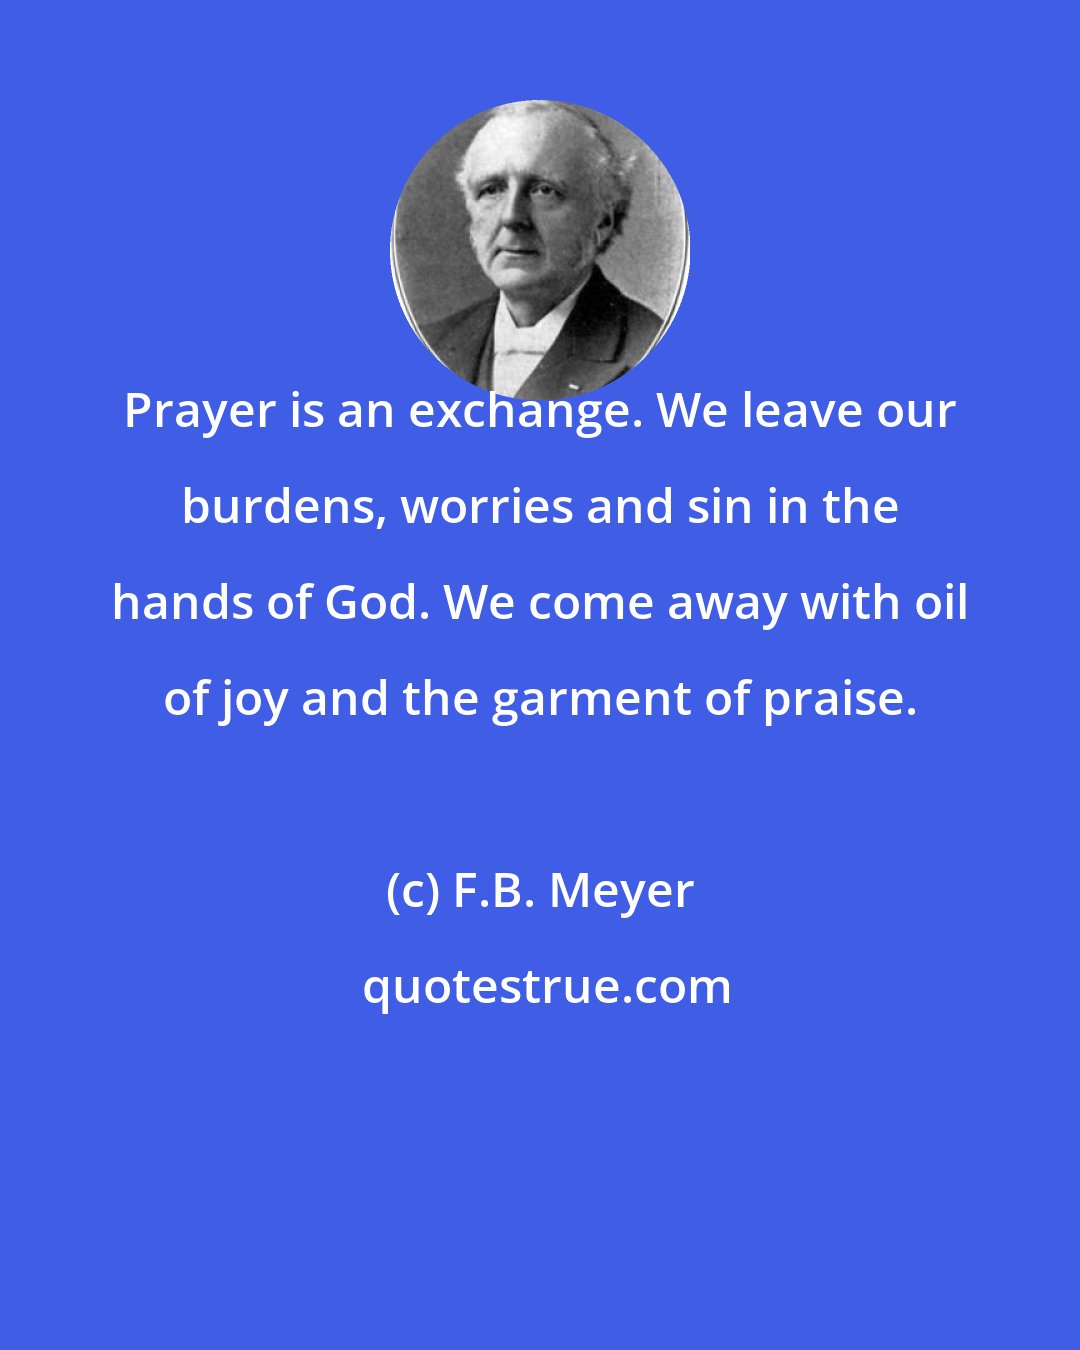 F.B. Meyer: Prayer is an exchange. We leave our burdens, worries and sin in the hands of God. We come away with oil of joy and the garment of praise.